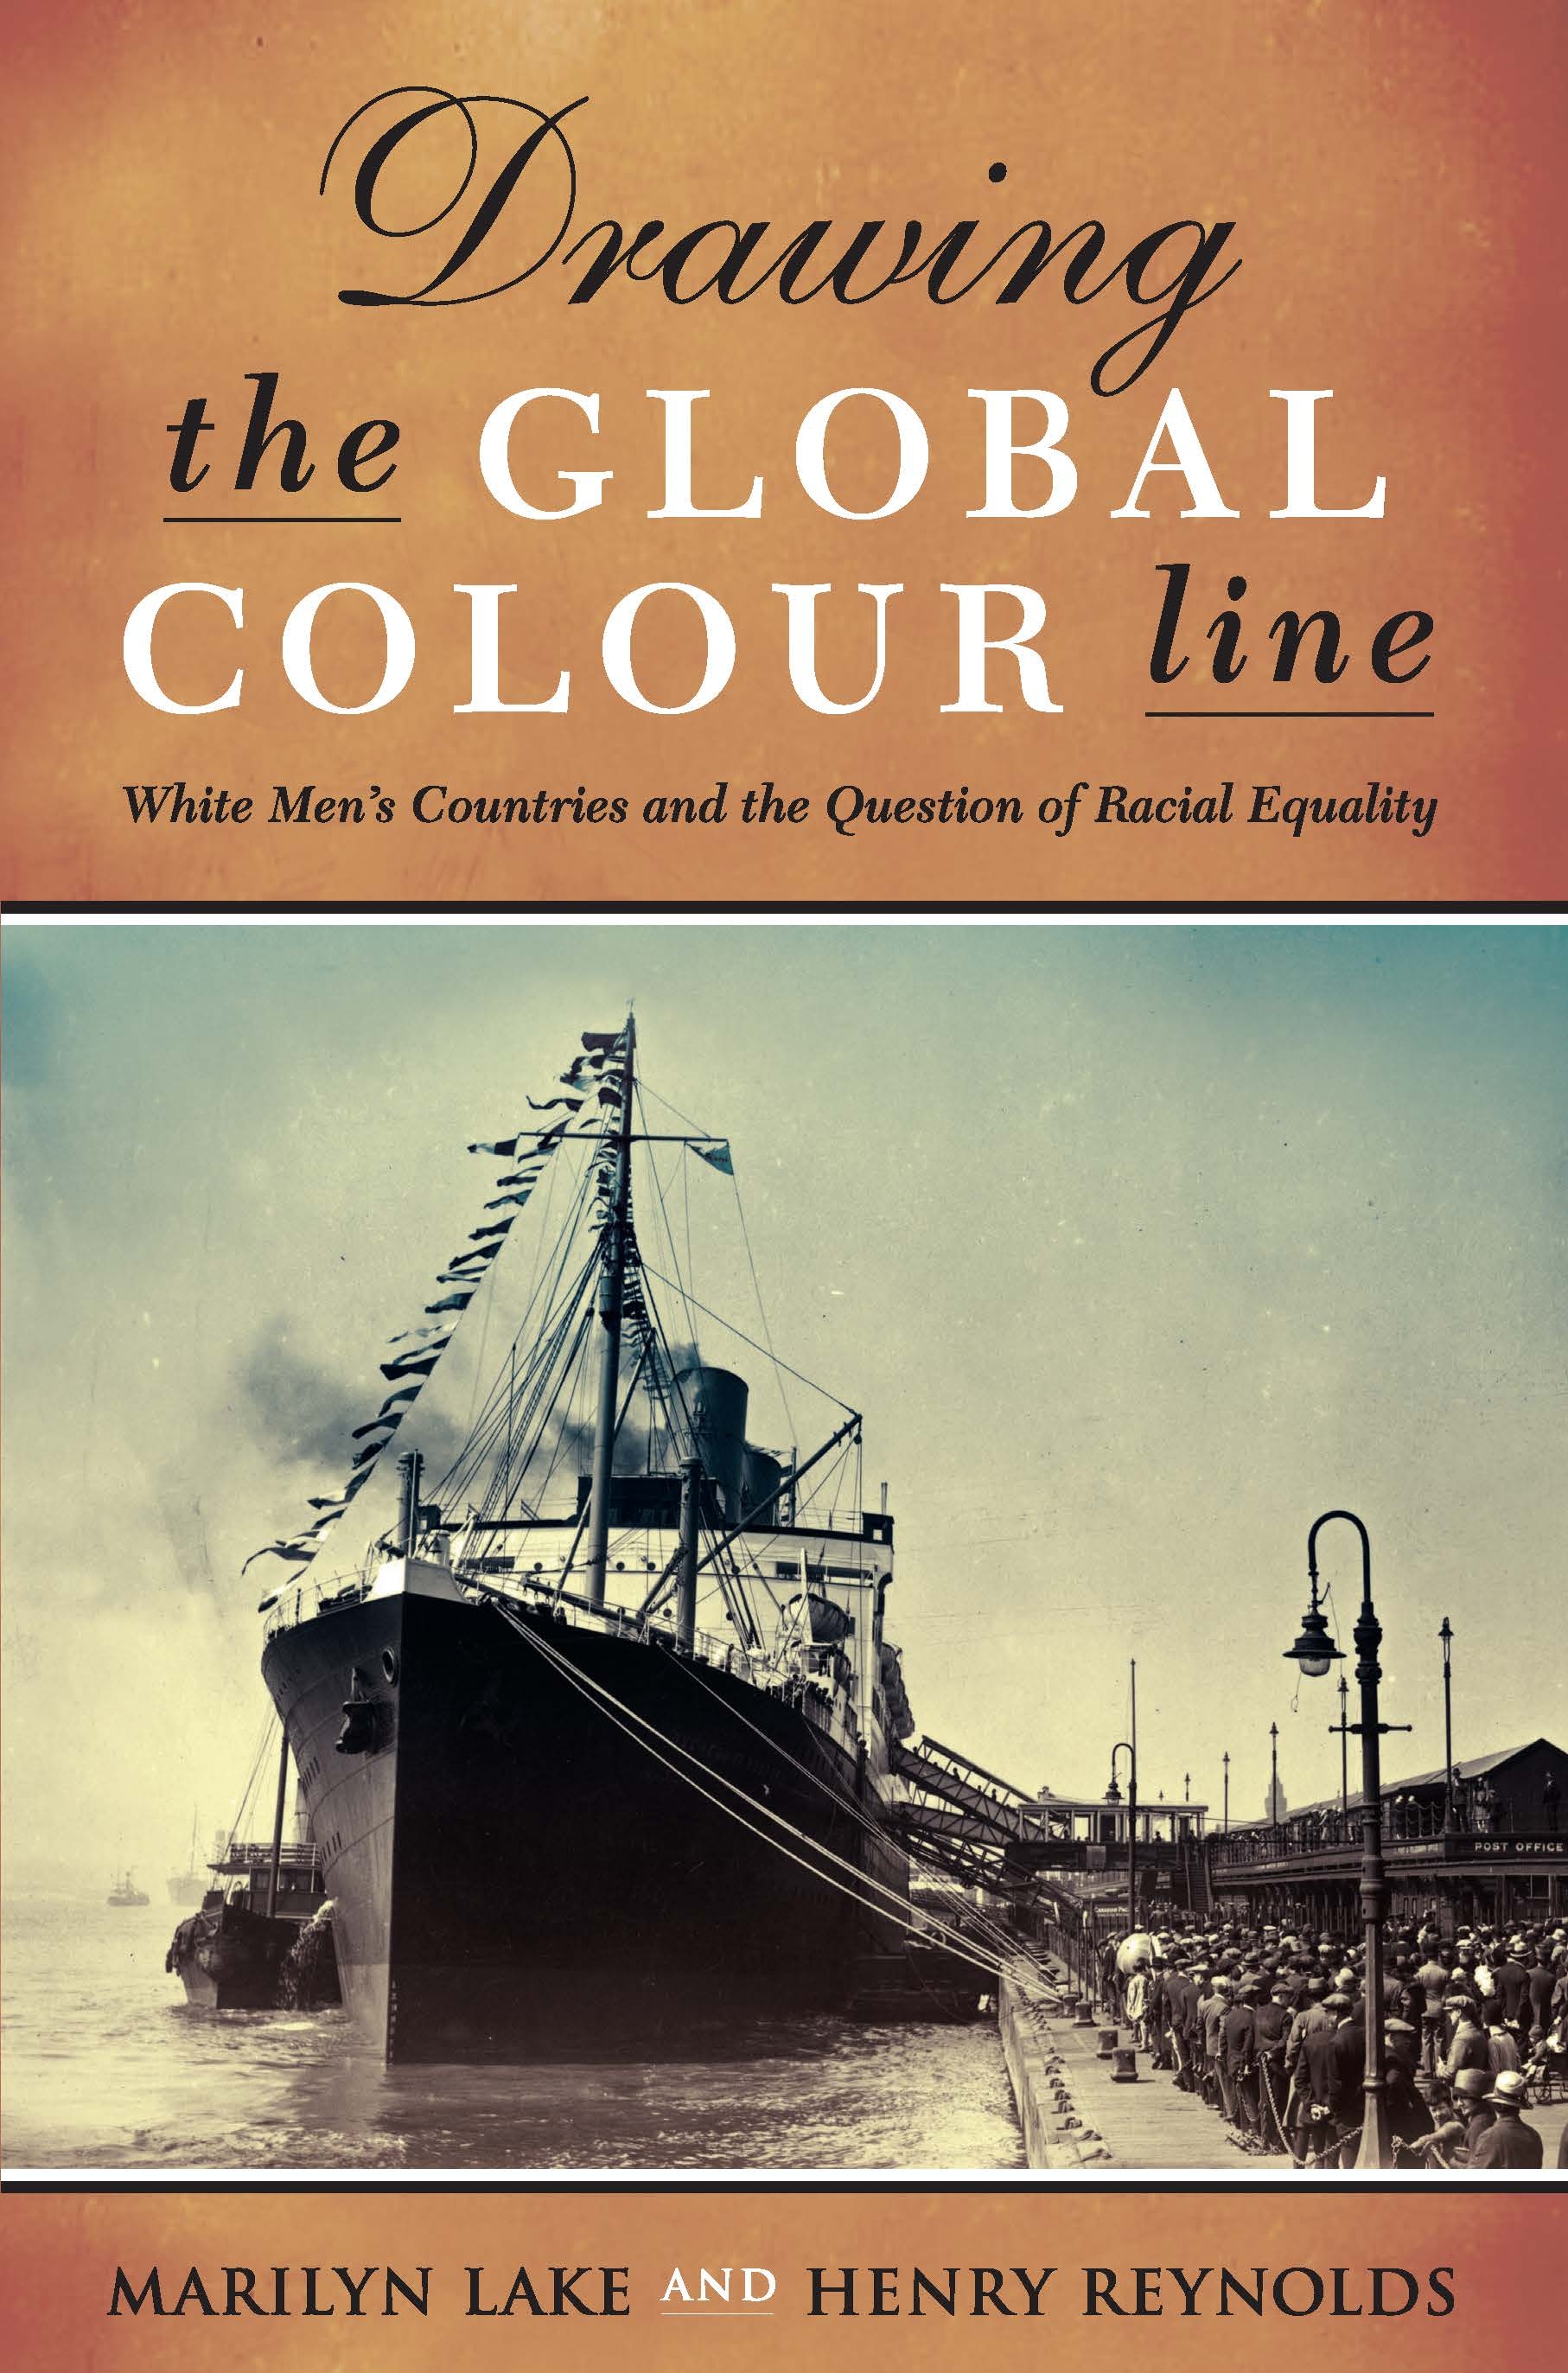 Drawing the Global Colour line: White men’s countries and the question of racial equality